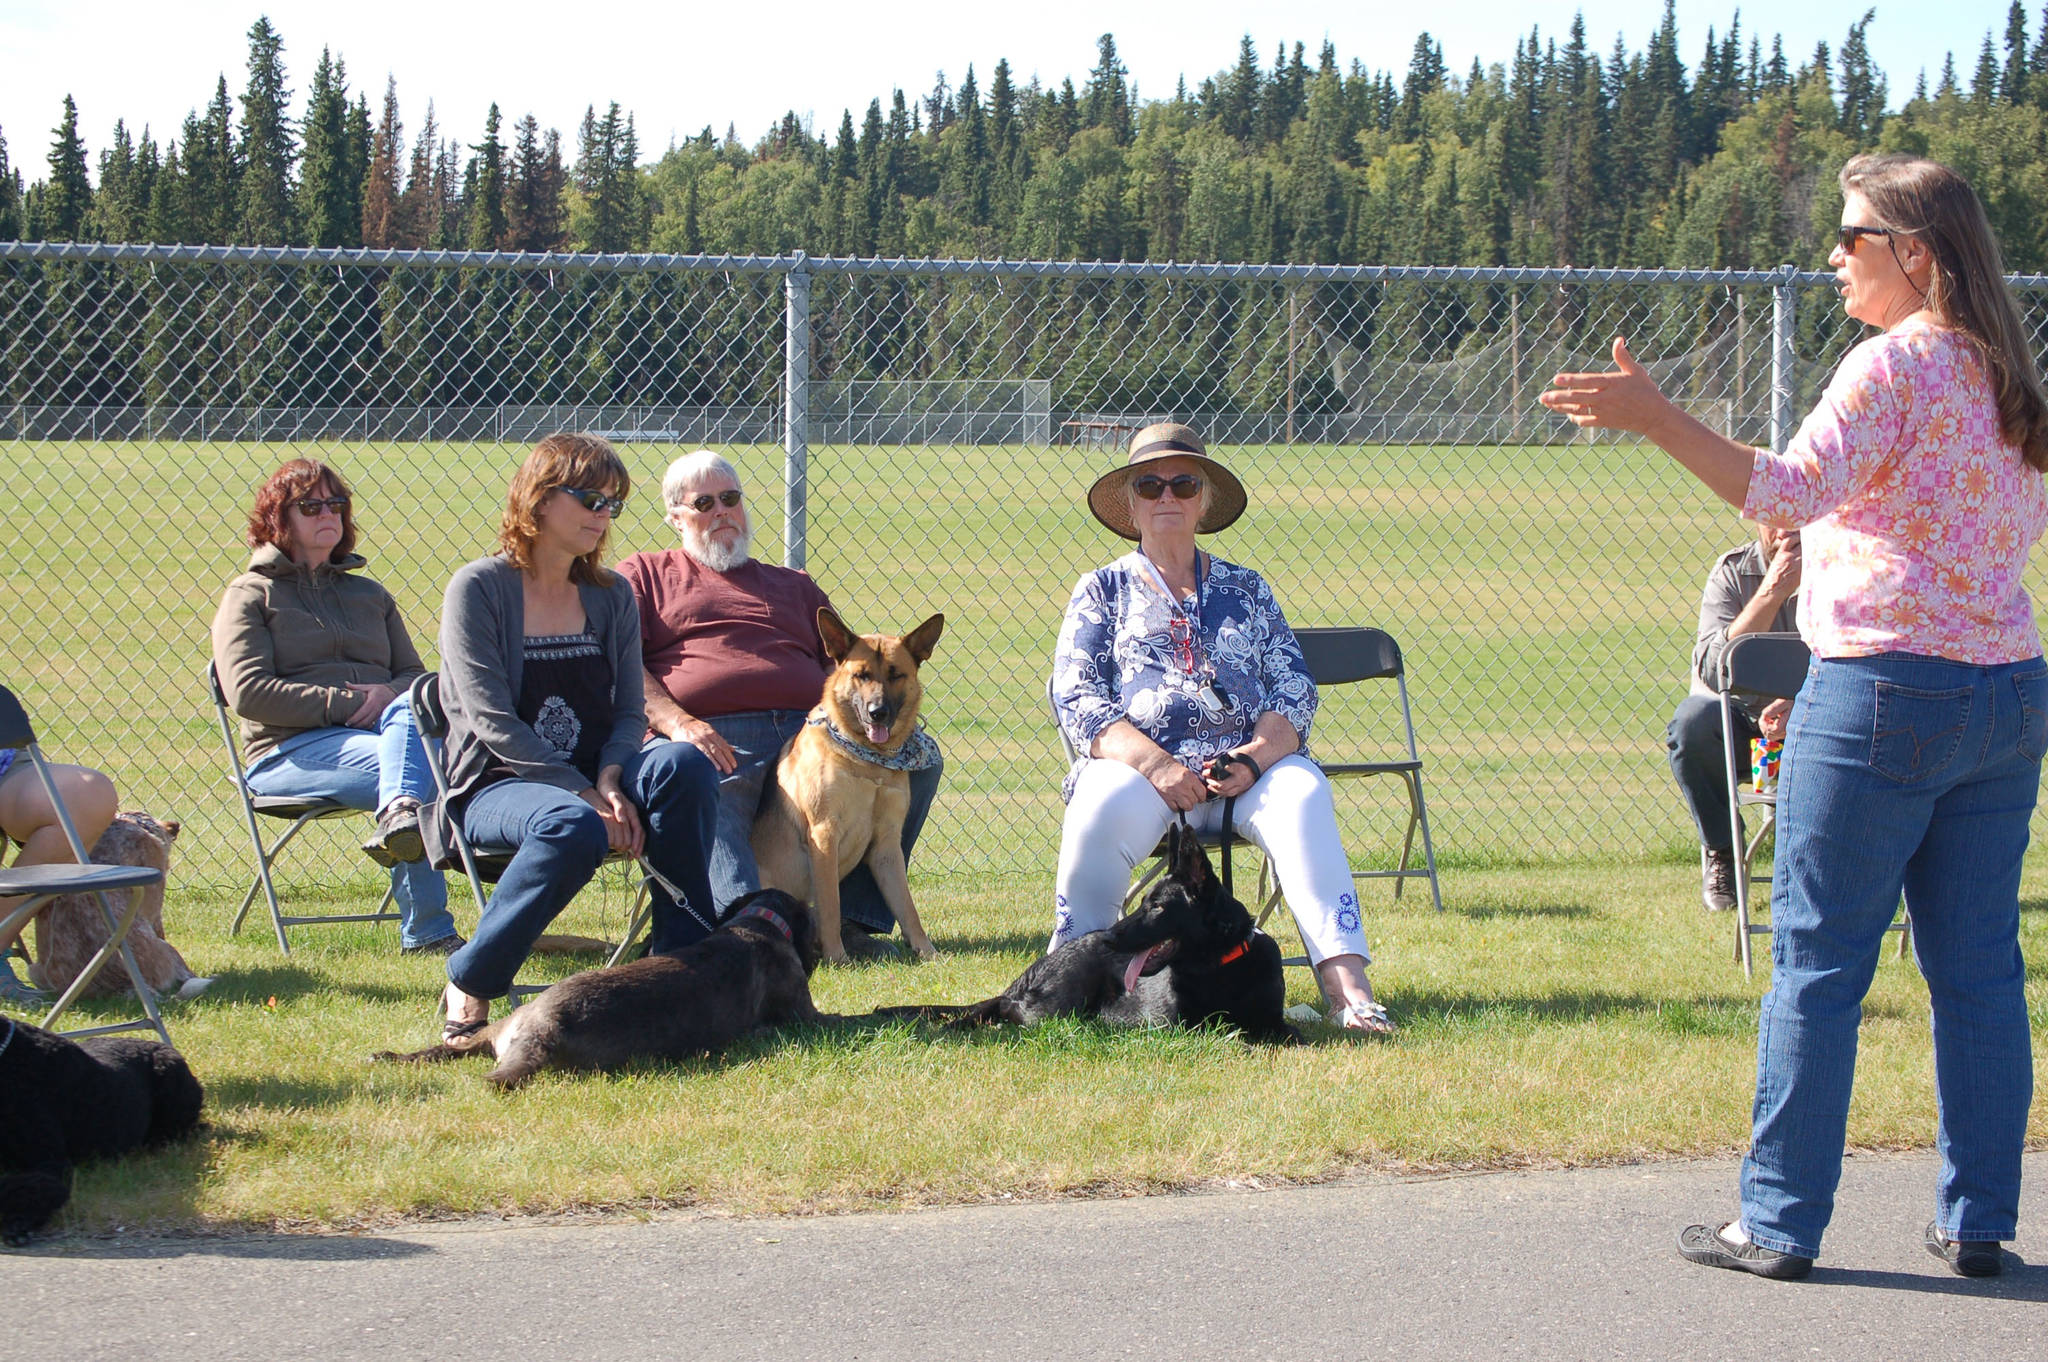 Scotch Pines Dog Training teacher Stephanie Hostetter, right, addresses dogs and people ahead of a graduation ceremony for the obedience-training class on Wednesday, Aug. 22, 2018, in Soldotna, Alaska. (Photo by Erin Thompson/Peninsula Clarion)